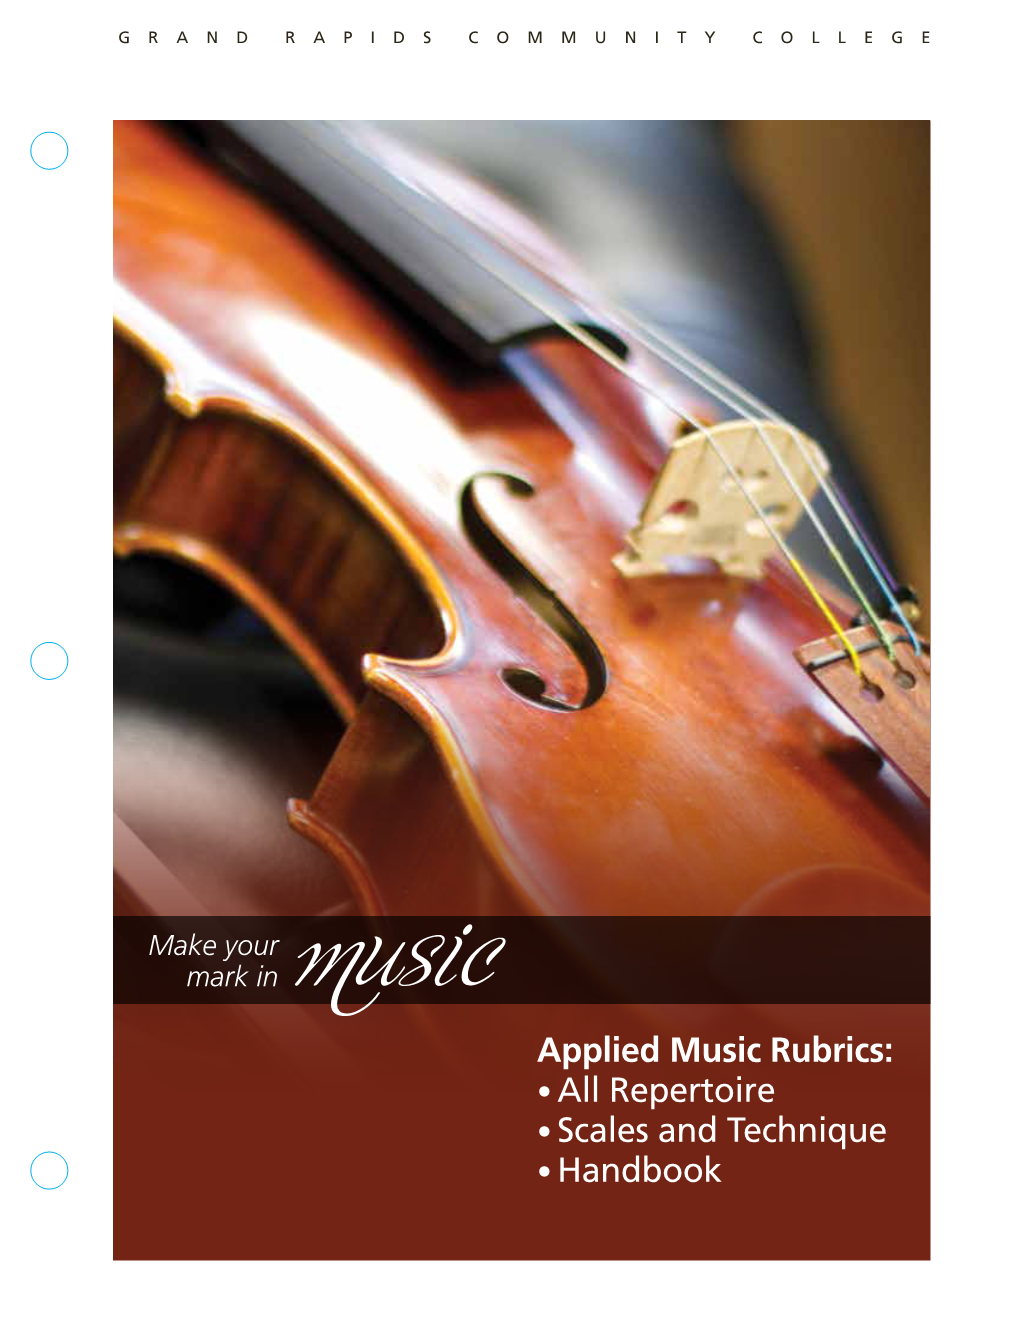 Applied Music Rubrics: • All Repertoire • Scales and Technique • Handbook